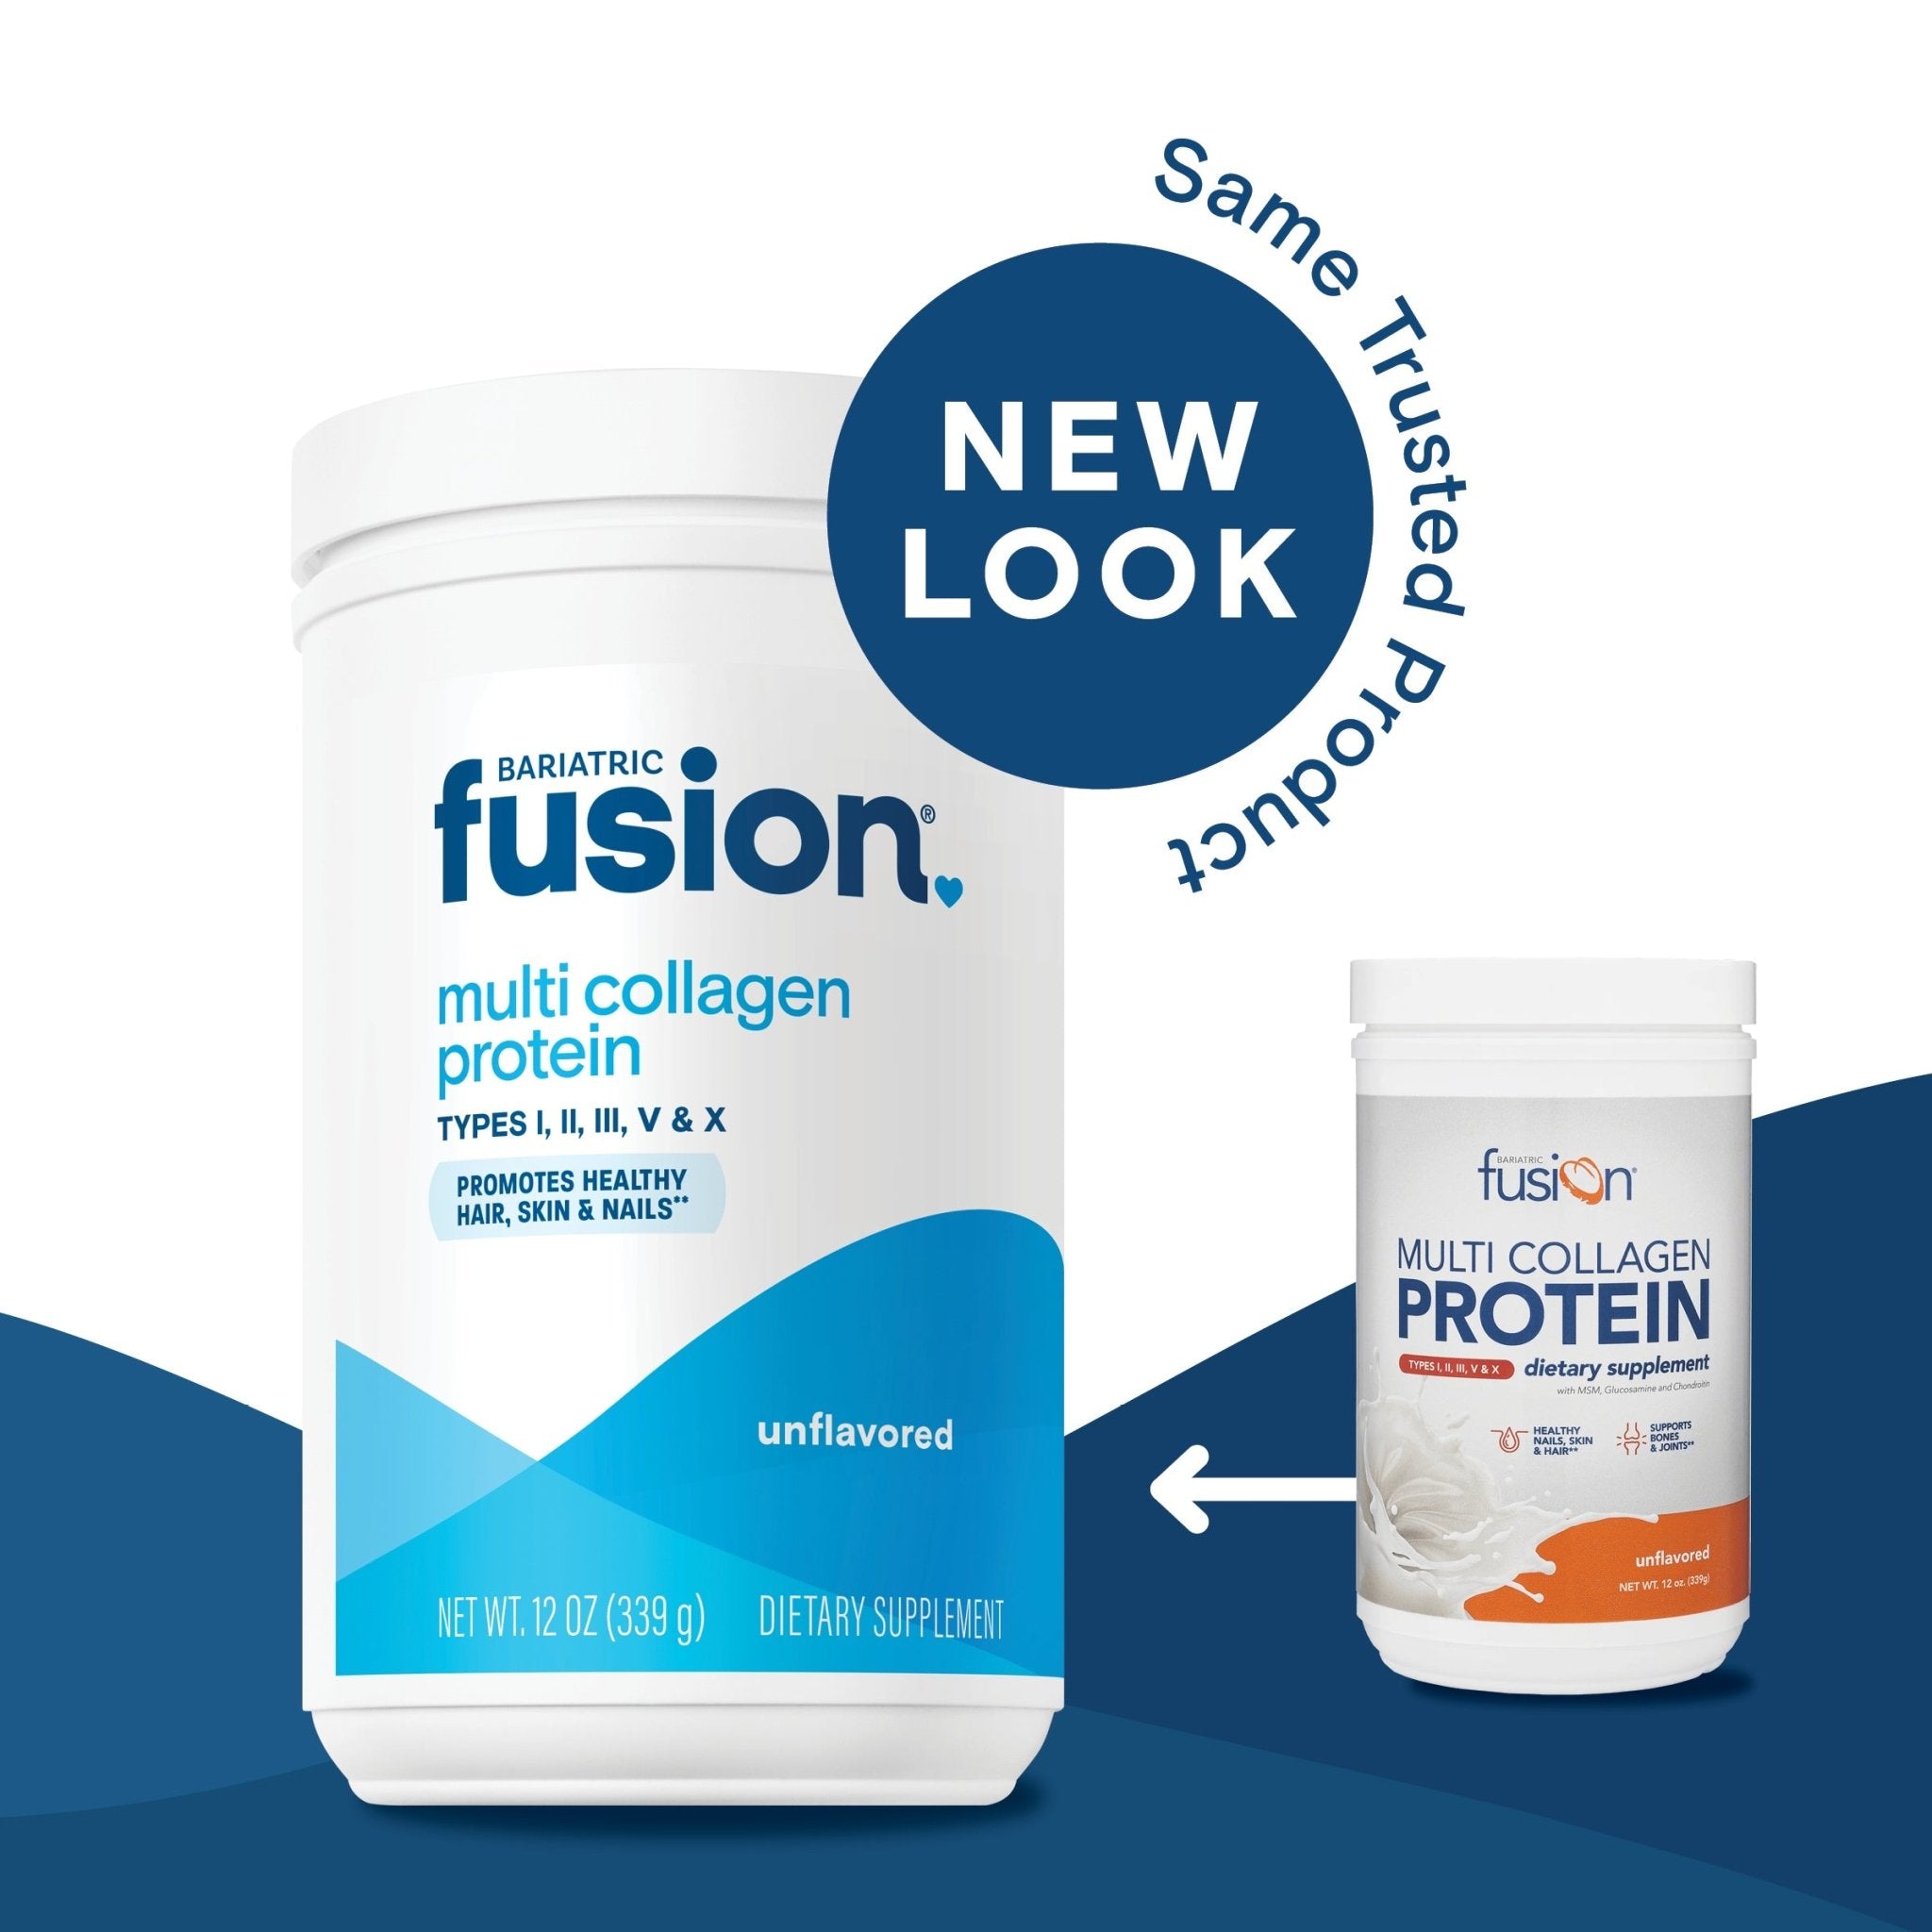 Unflavored Multi Collagen Protein Powder new look, same trusted product.